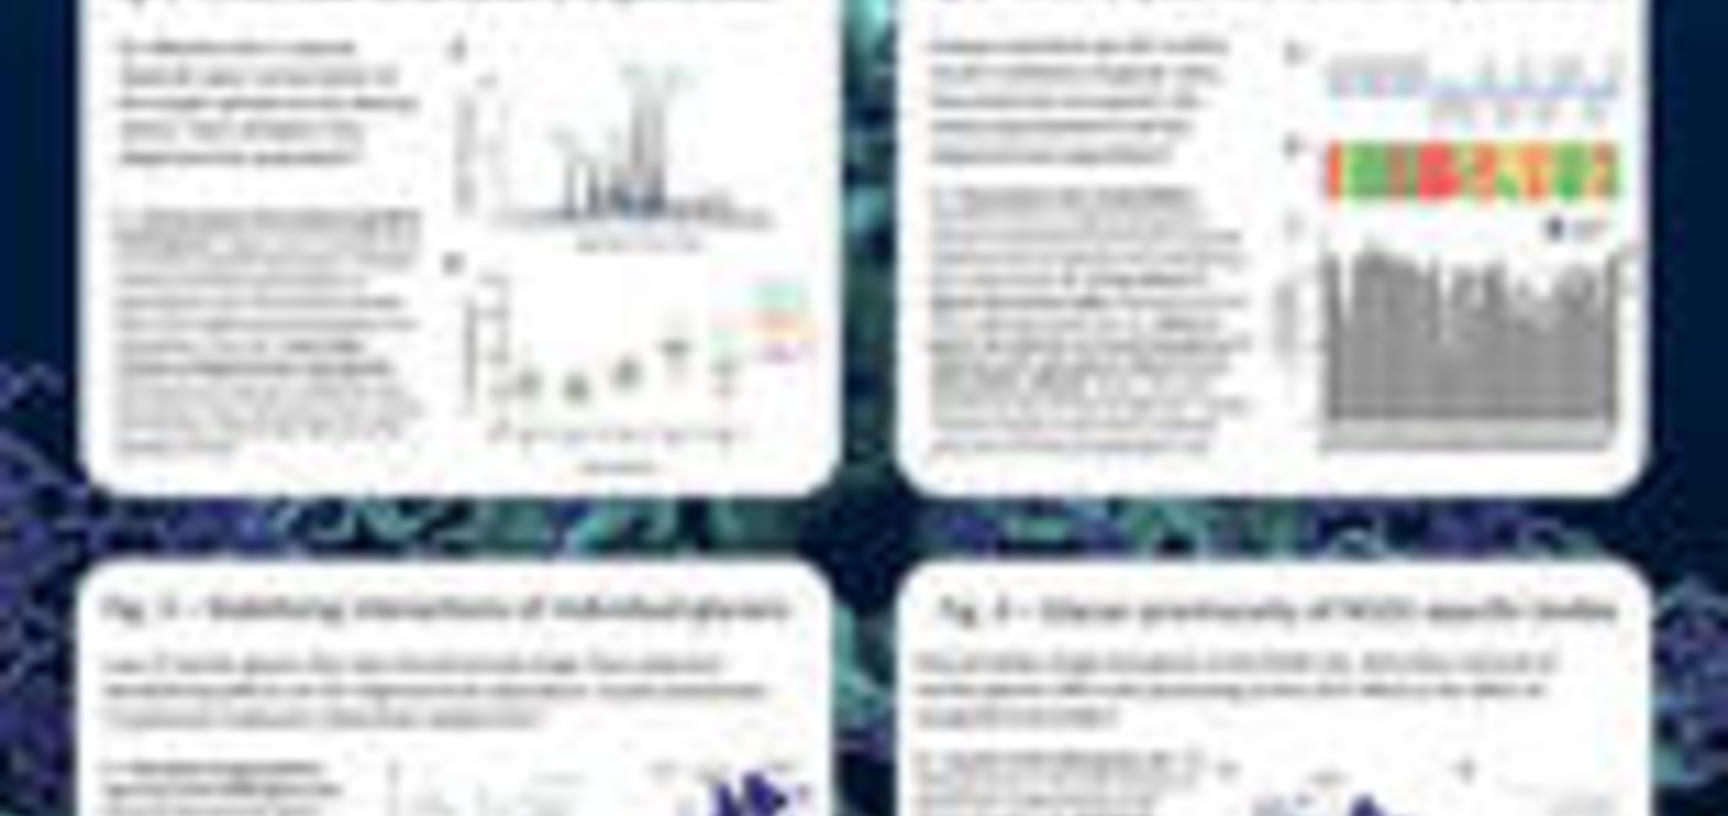 2014 poster hiv 1 glycan shield laura pritchard